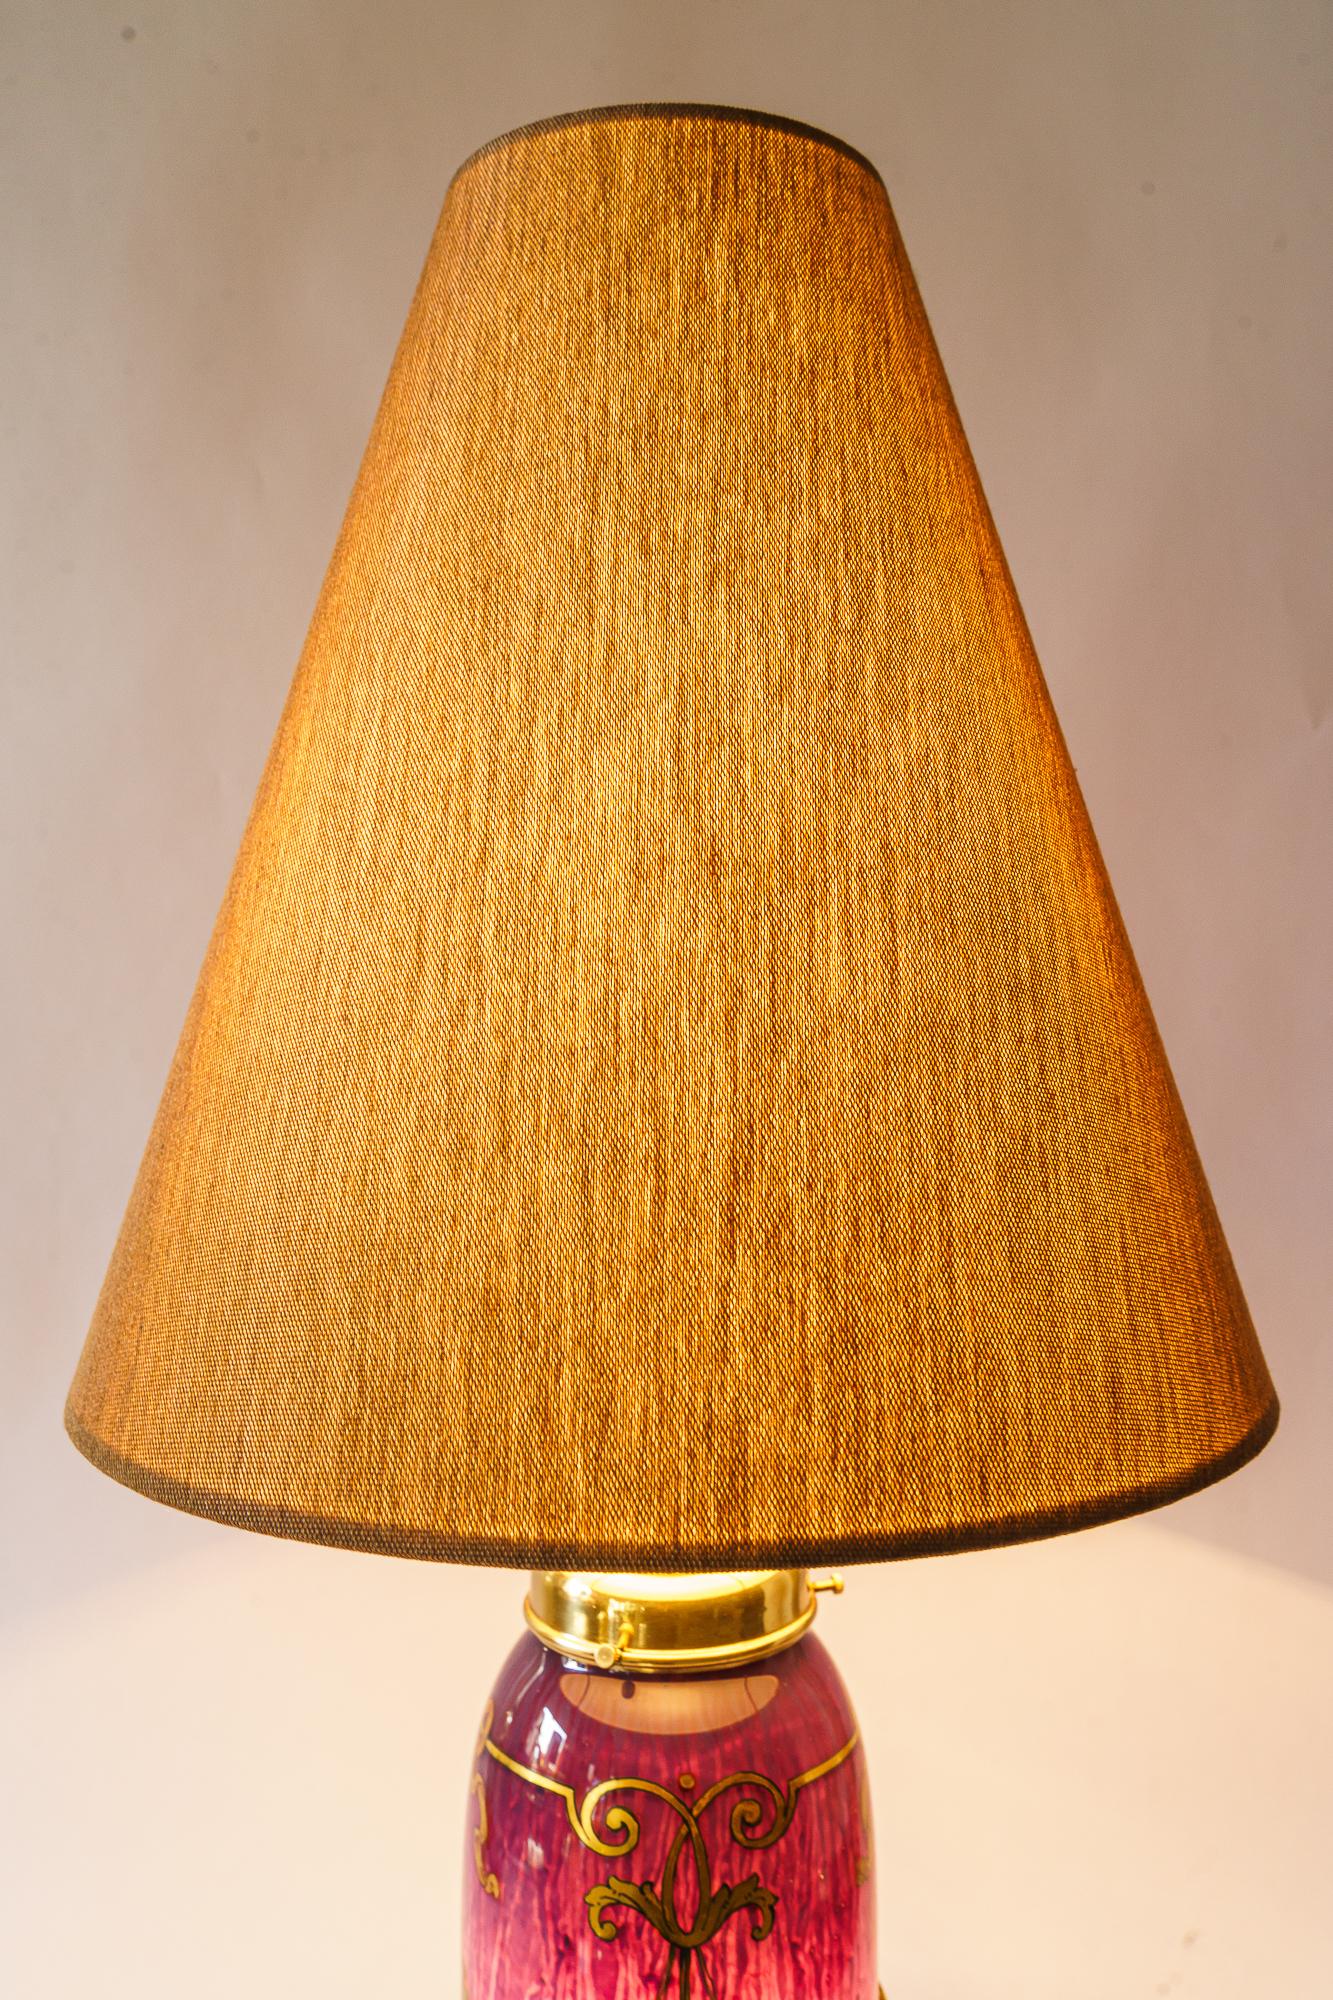 Rare Art Deco Glass Table Lamp with Fabric Shade, Vienna, Around 1920s  For Sale 5